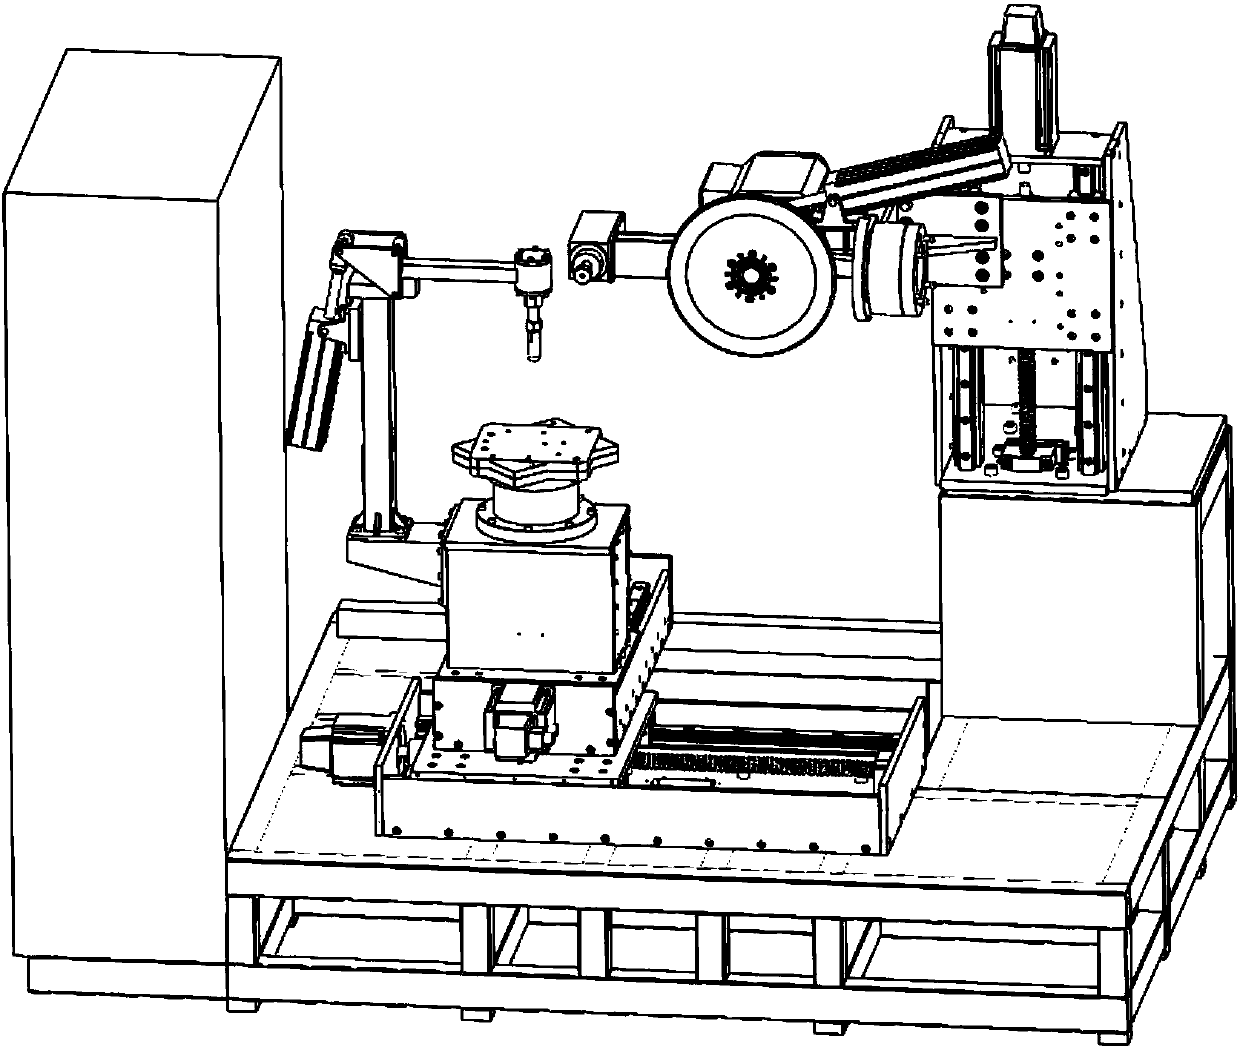 Grinder with rotary machine tool table